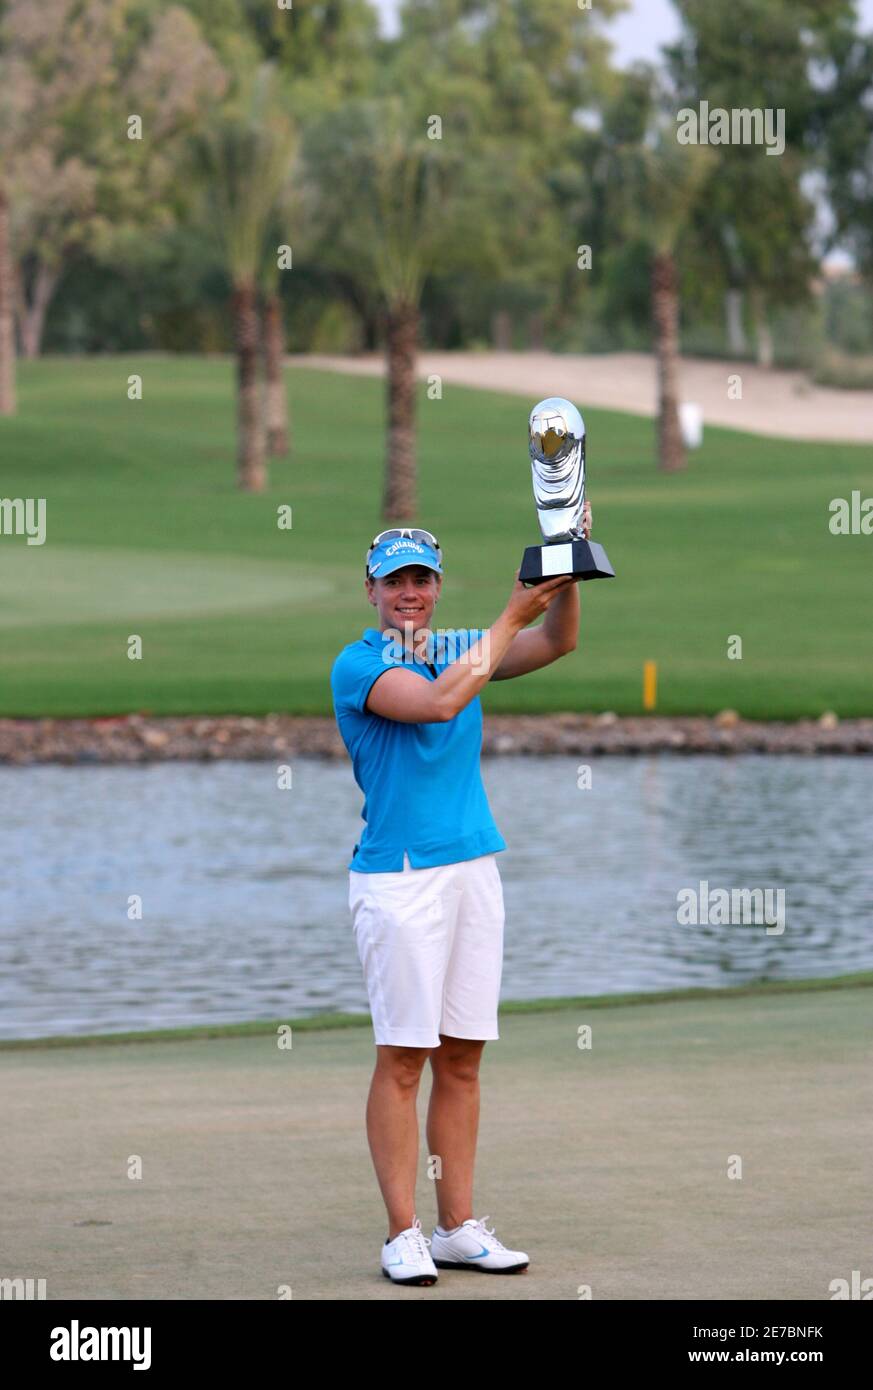 Annika Sorenstam of Sweden holds up her trophy she celebrates her at the Dubai Ladies Masters golf tournament in Dubai, United Arab Emirates October 29, REUTERS/Ahmed Jadallah Stock Photo - Alamy